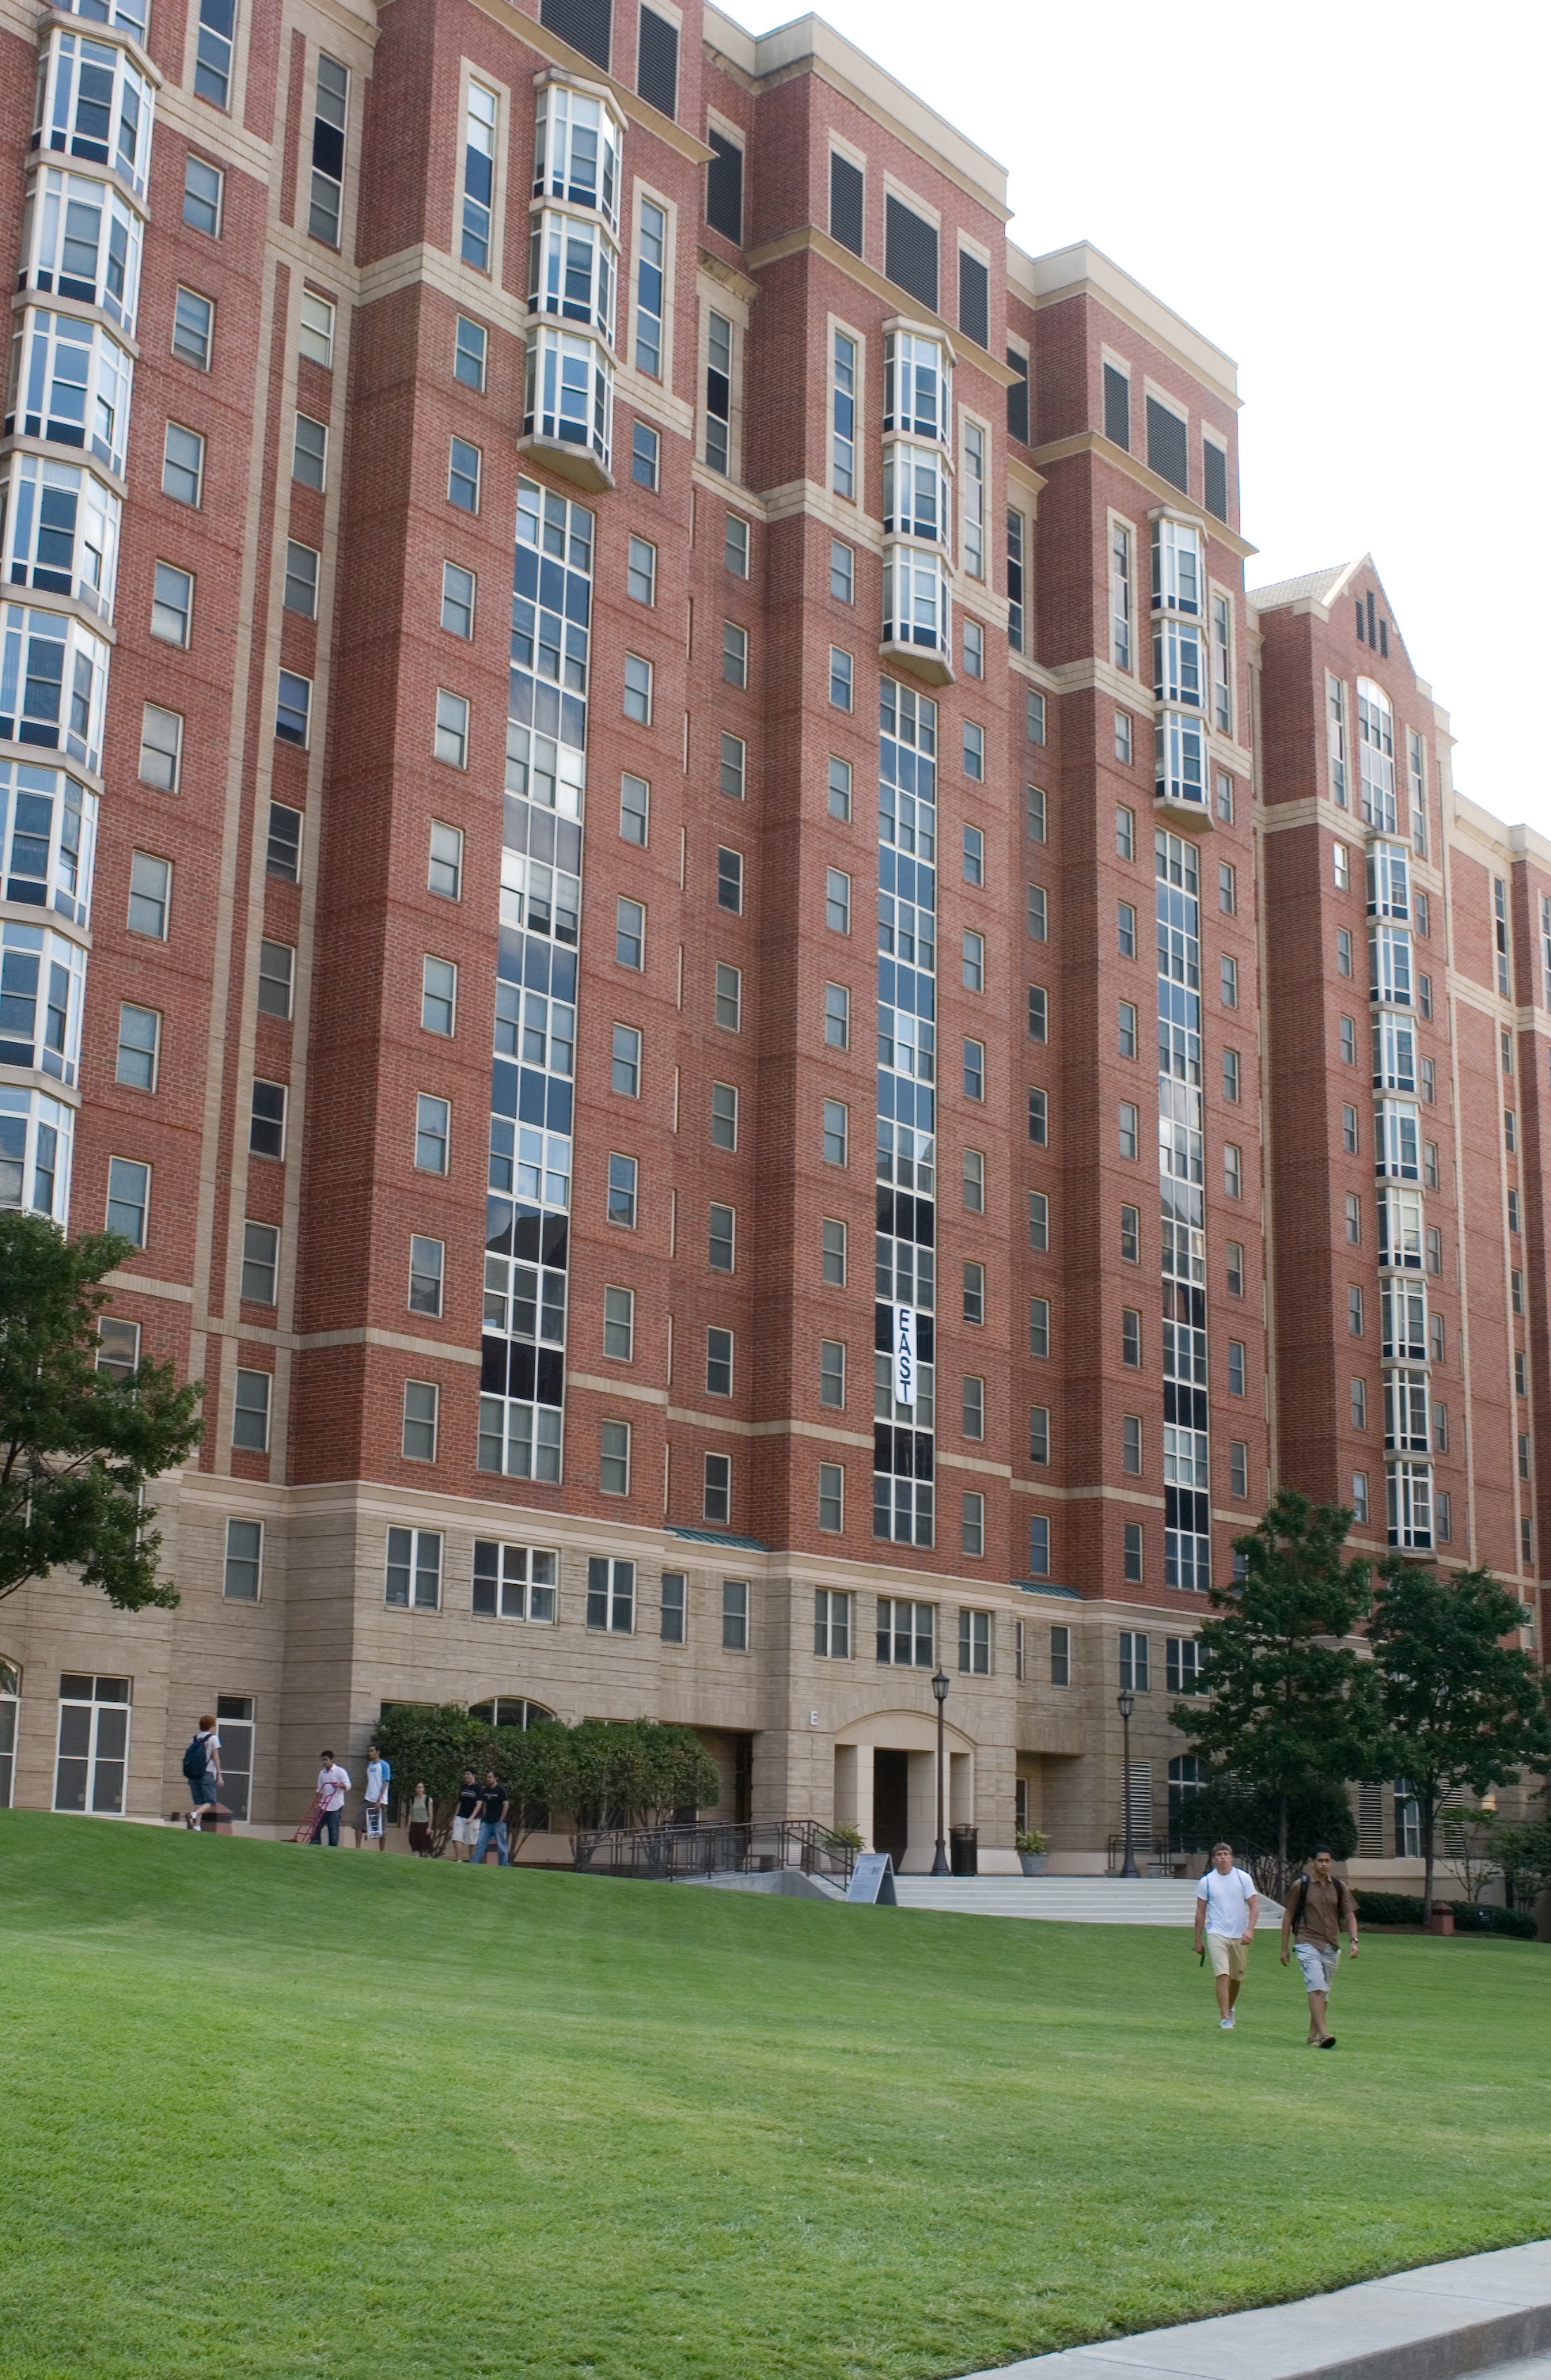 North Avenue Apartments is the largest student housing unit on the Georgia Tech campus.